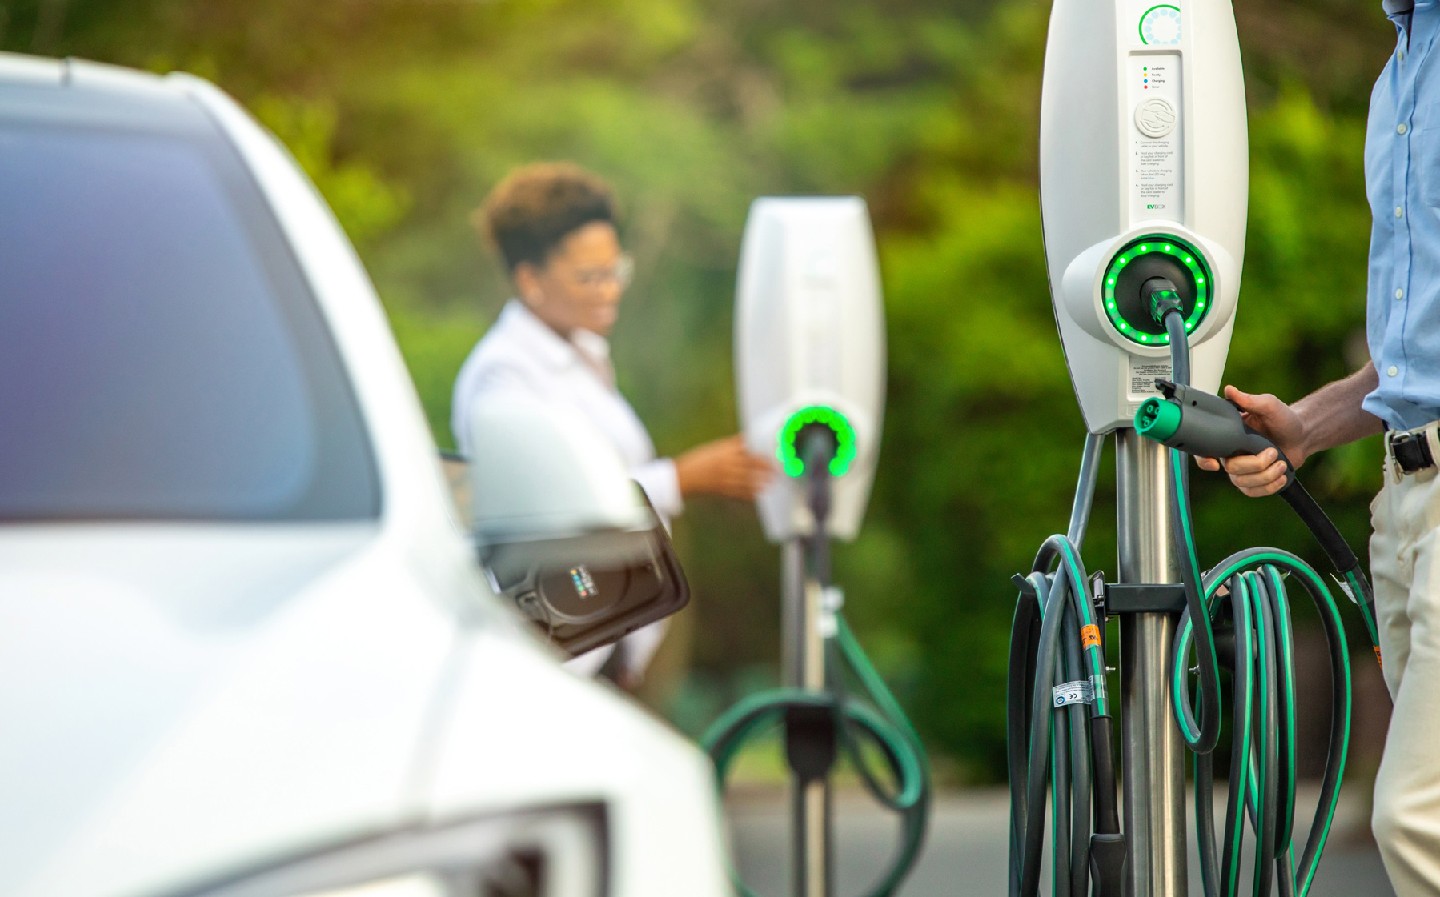 More than two thirds of buyers considering an electric vehicle as their next car